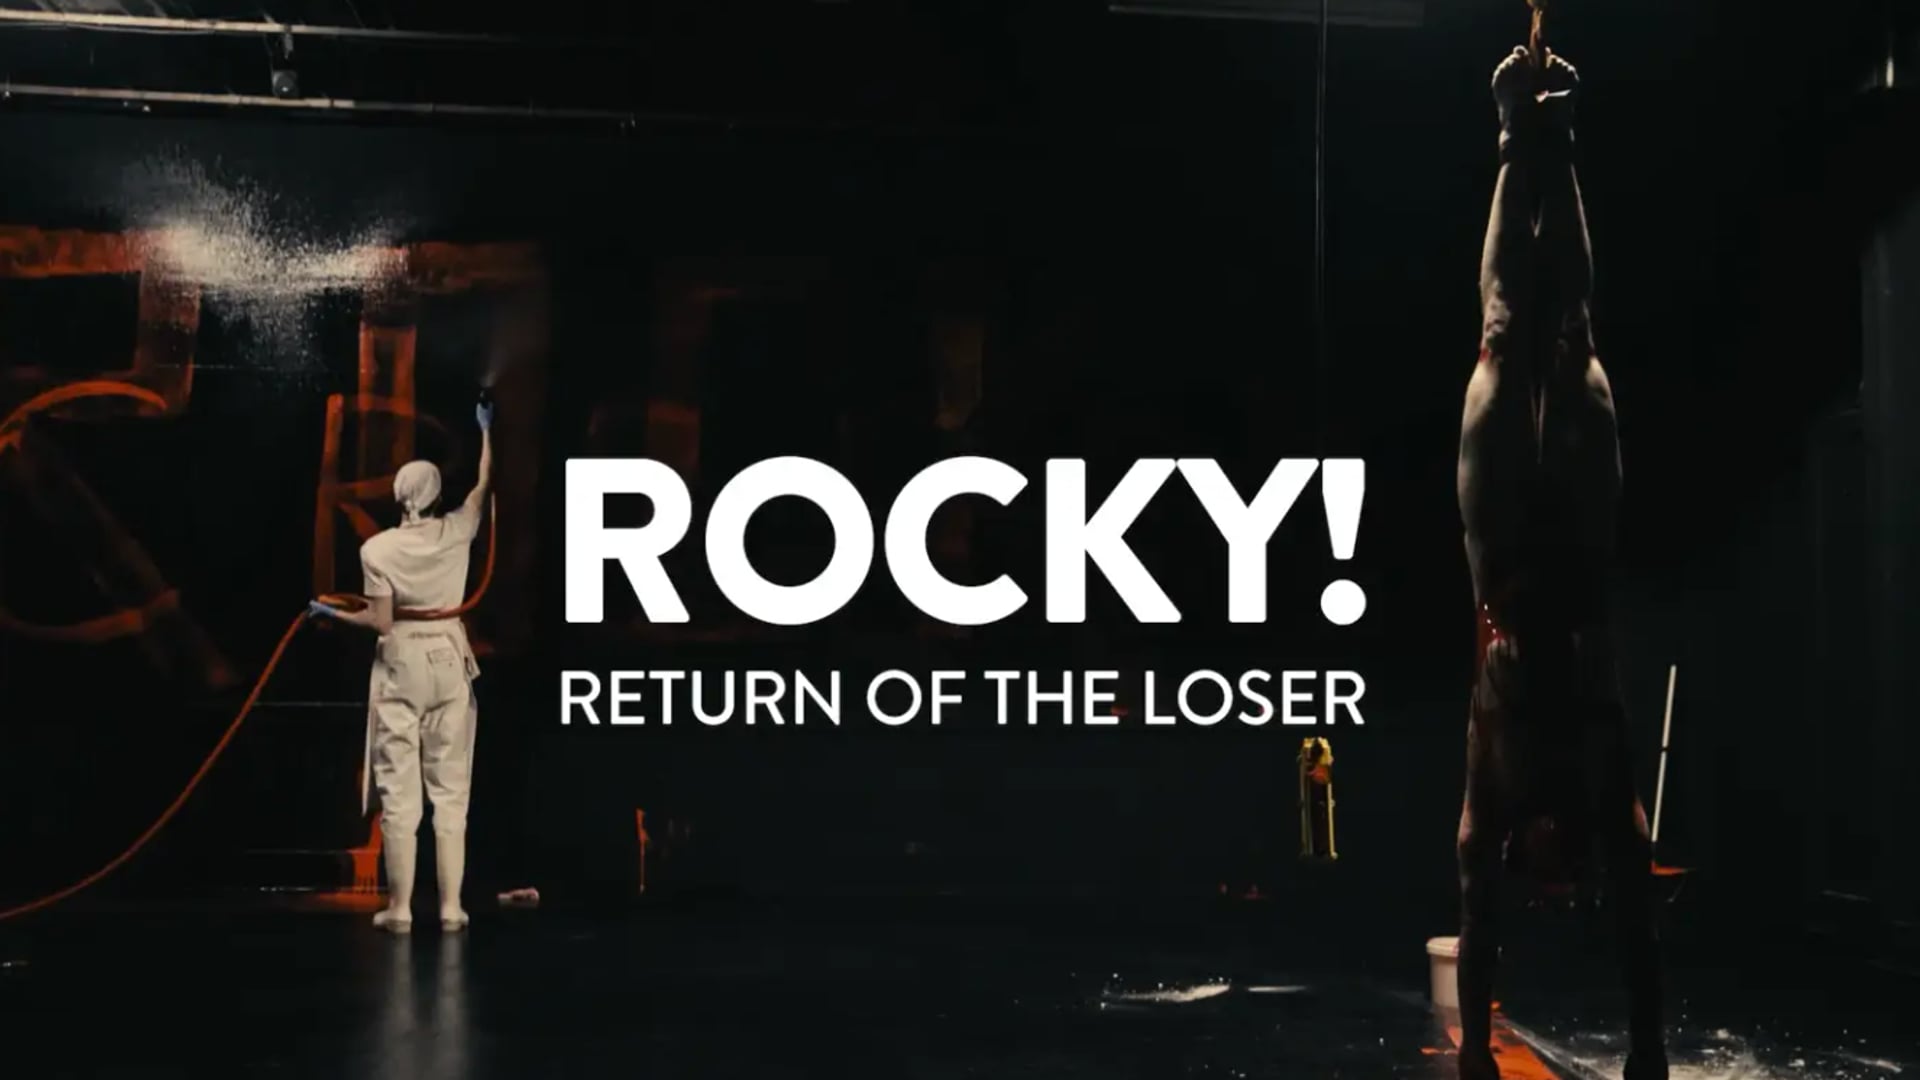 Rocky! Return of the Loser